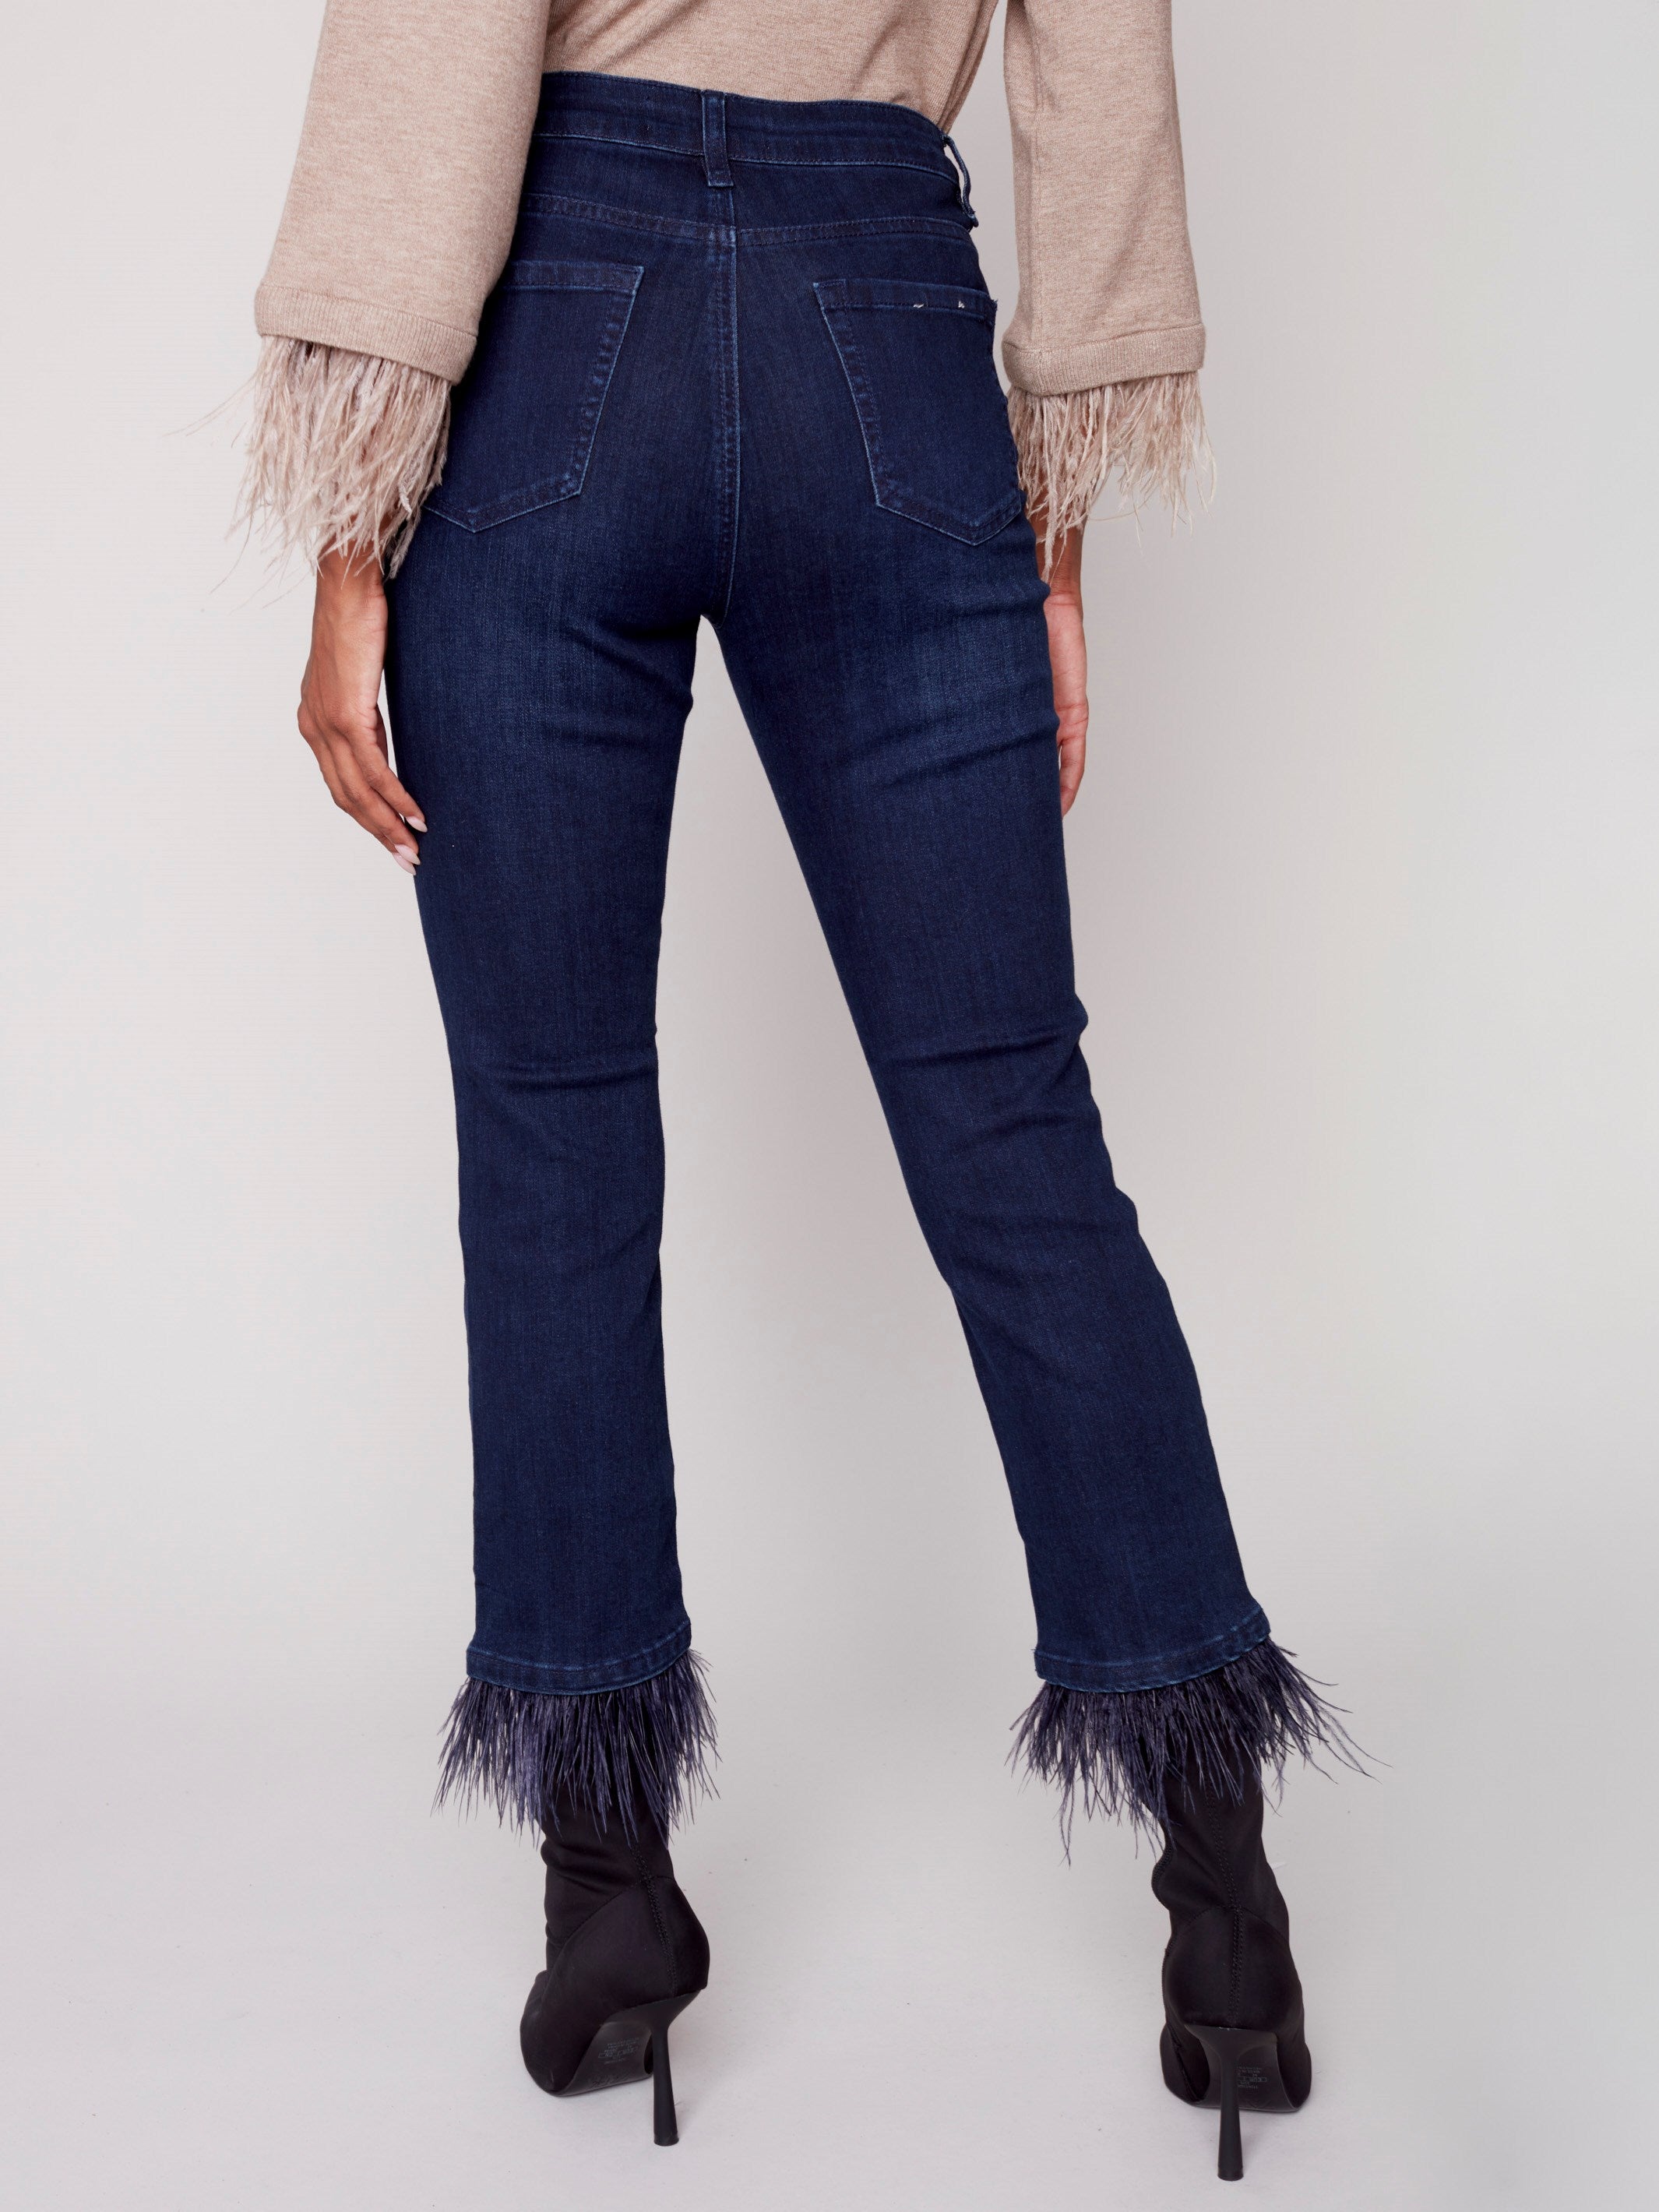 Jeans with Removable Feather Hem - Blue Black